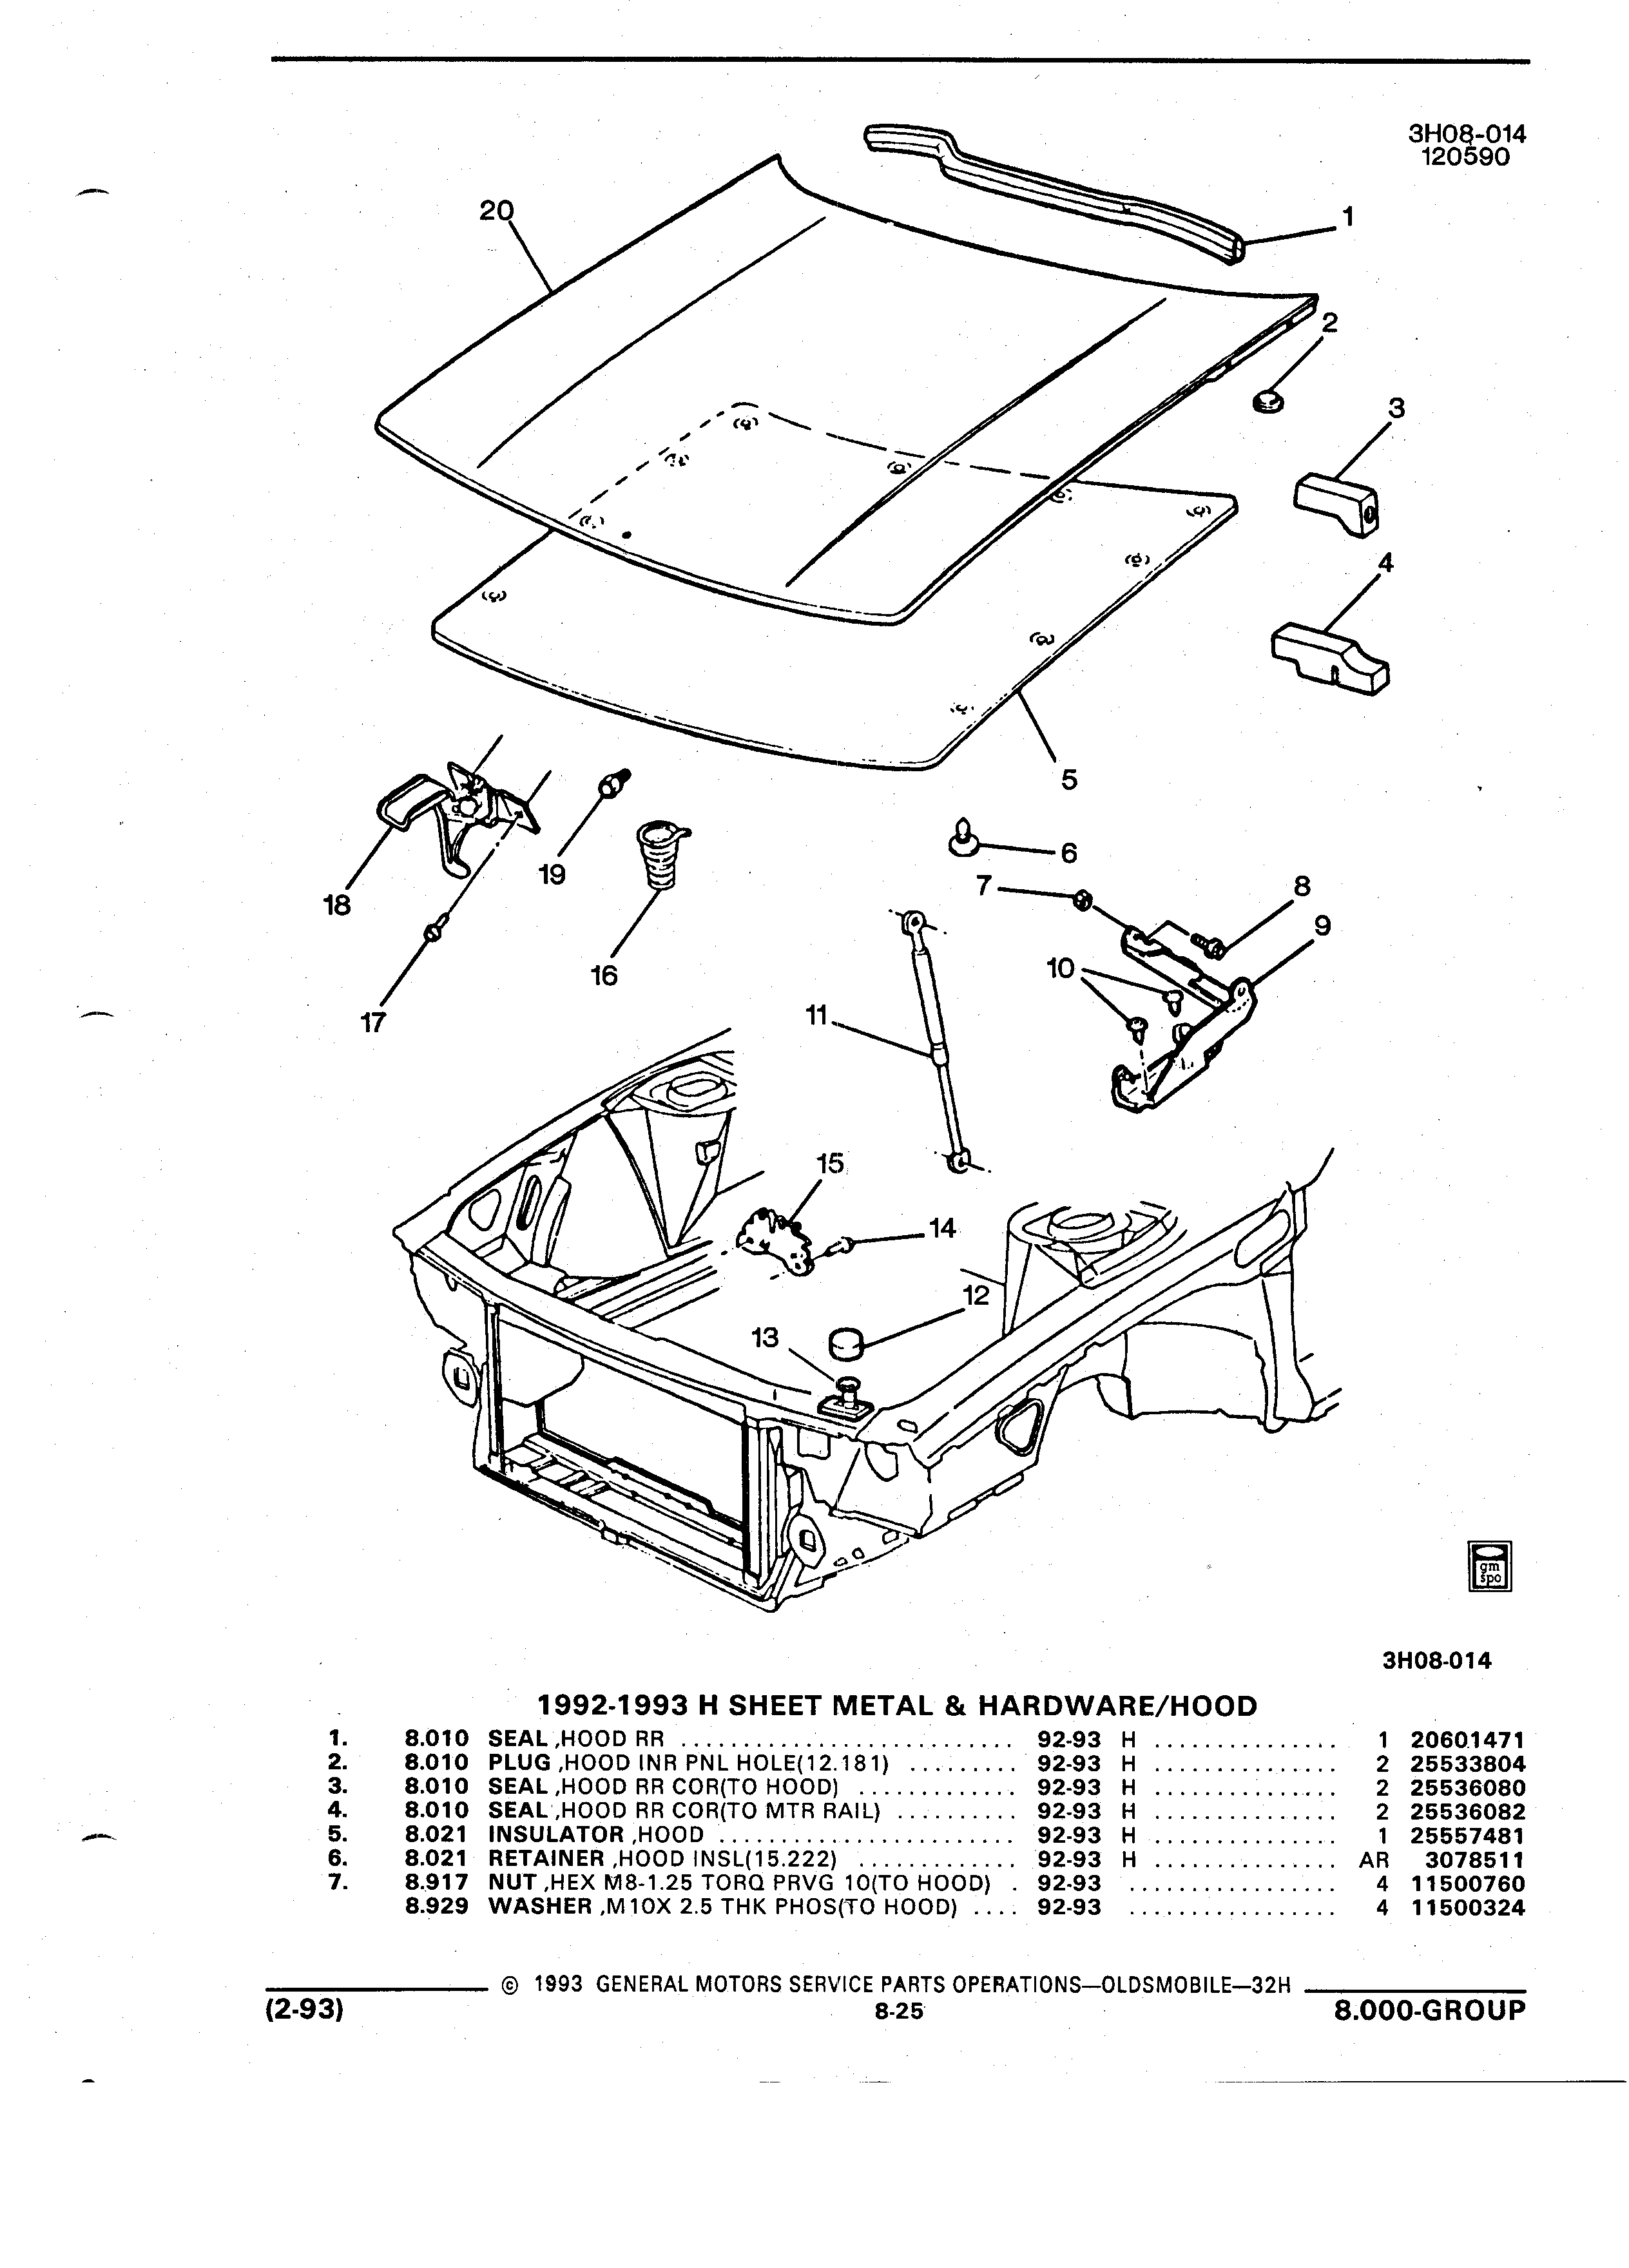 Parts and Accessories Catalog 32H February 1993